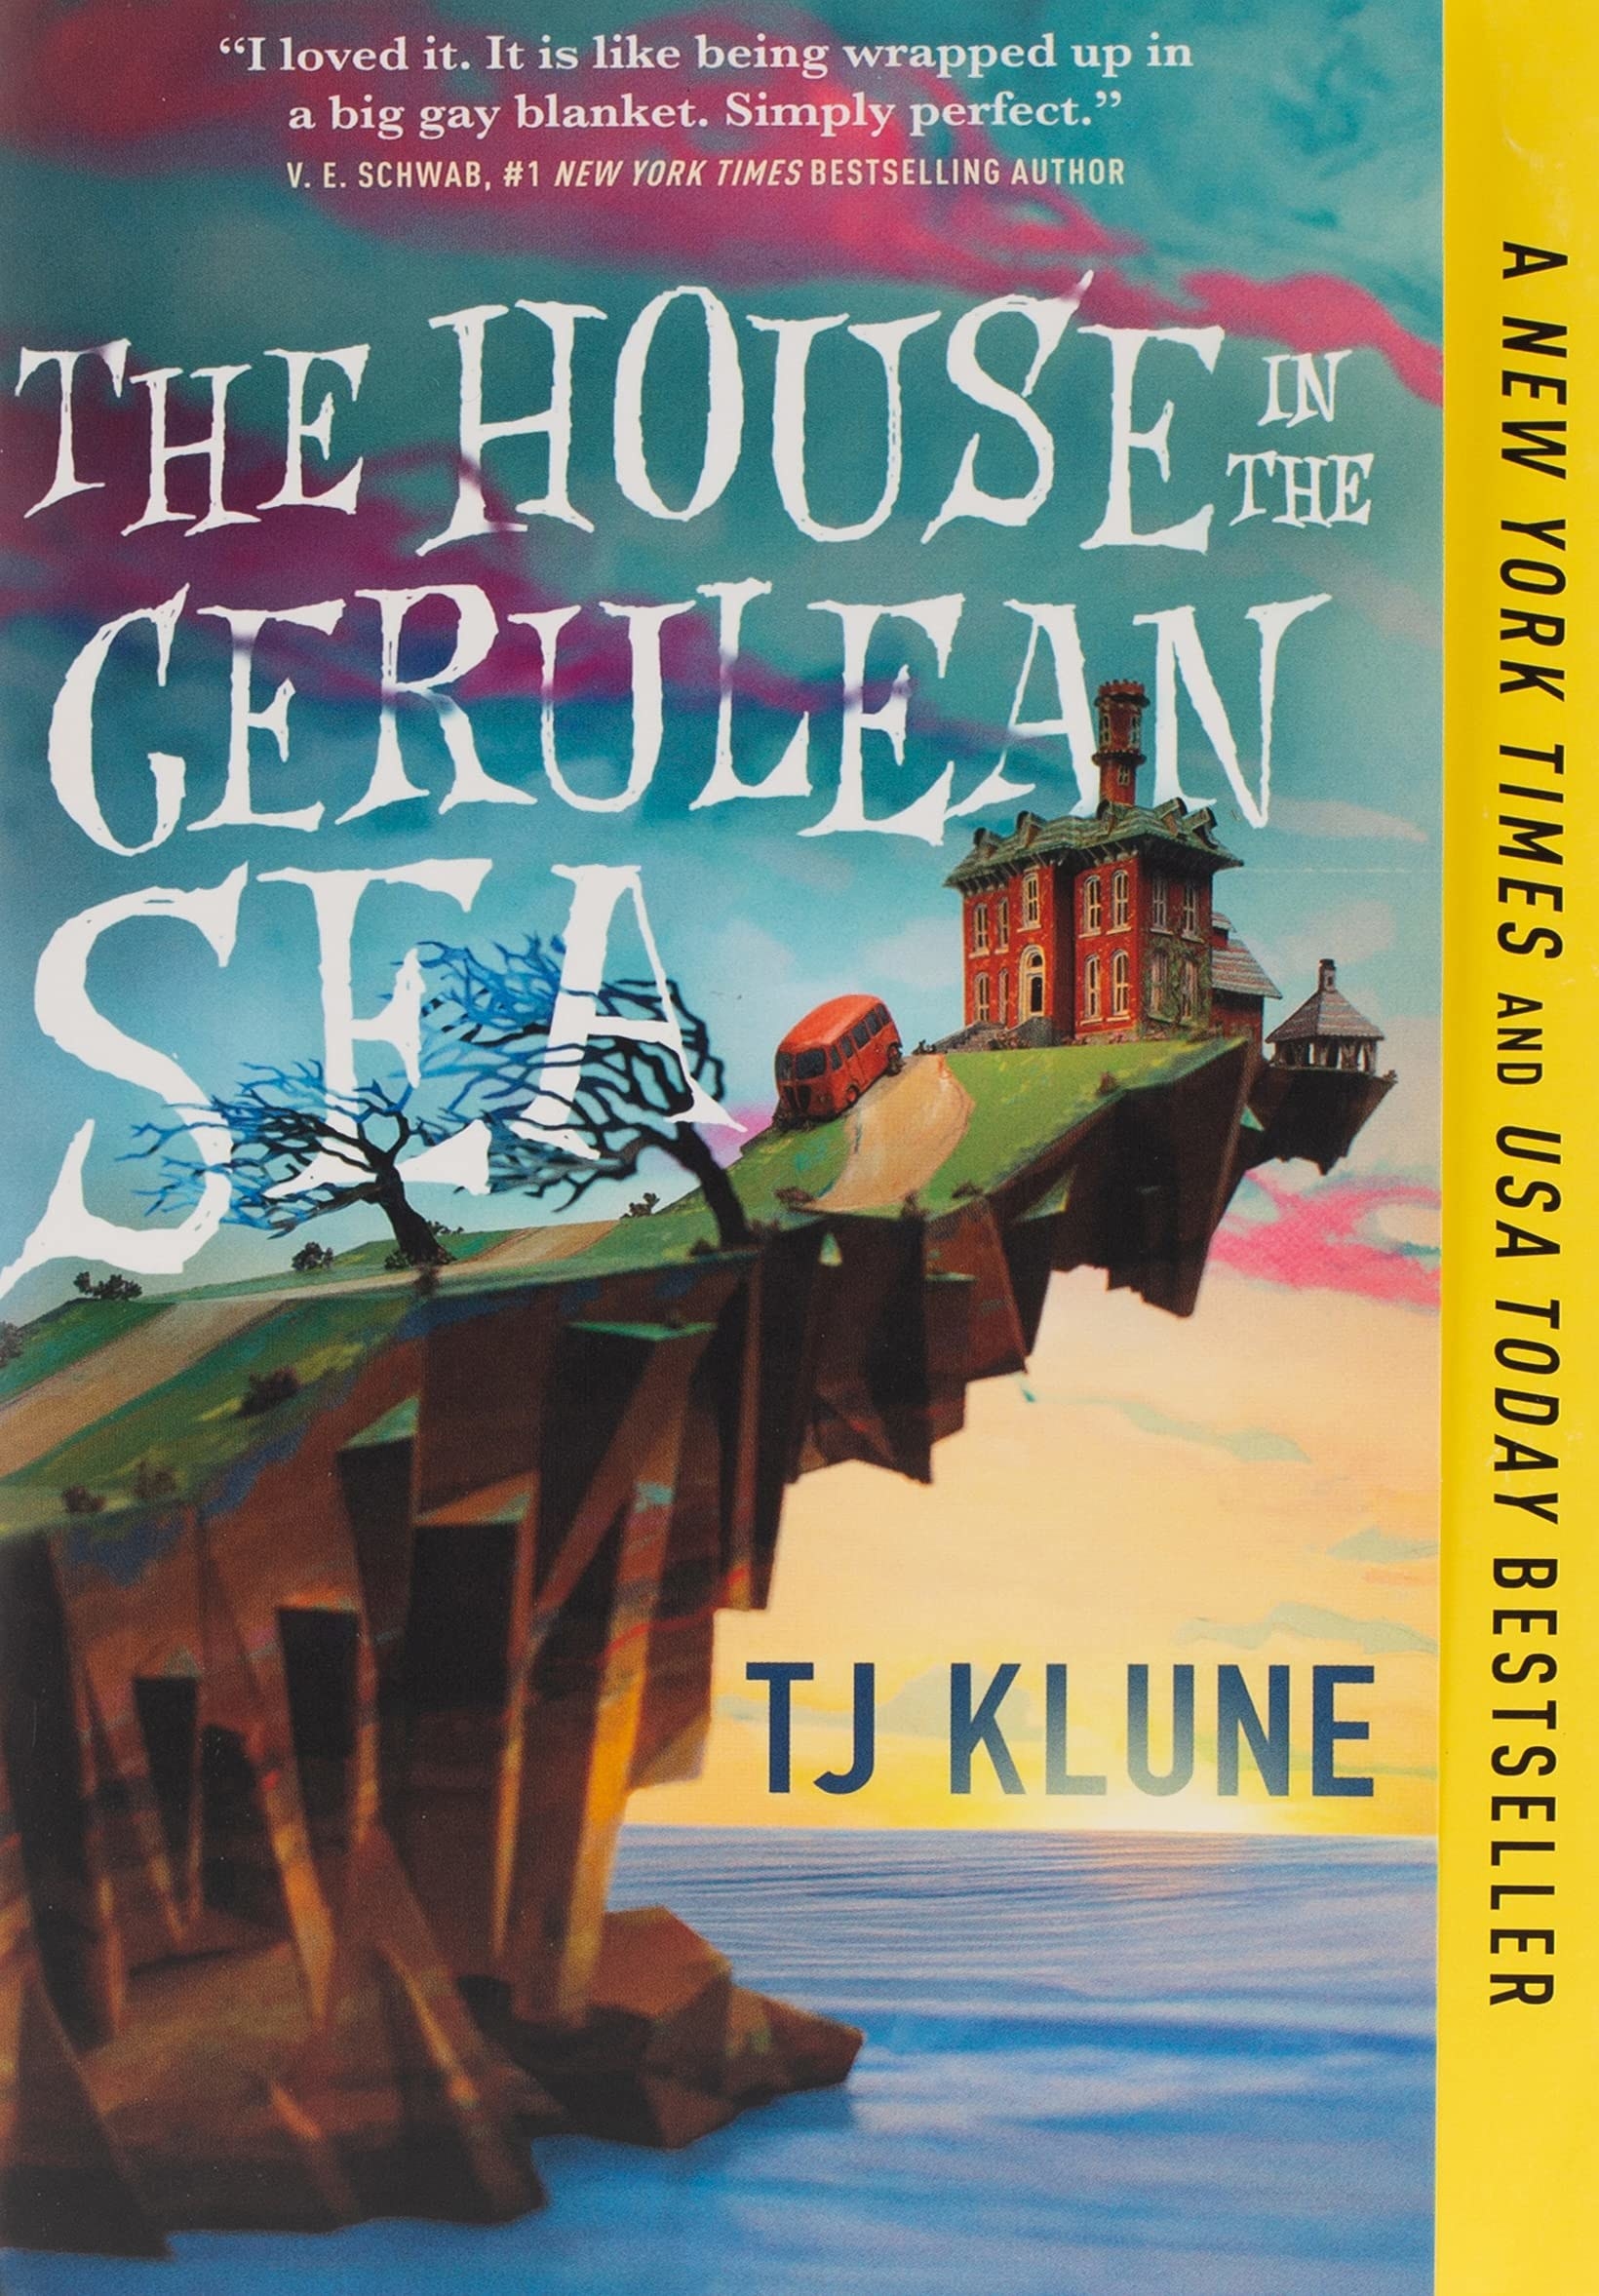 Book cover of &quot;The house in the cerulean sea&quot;